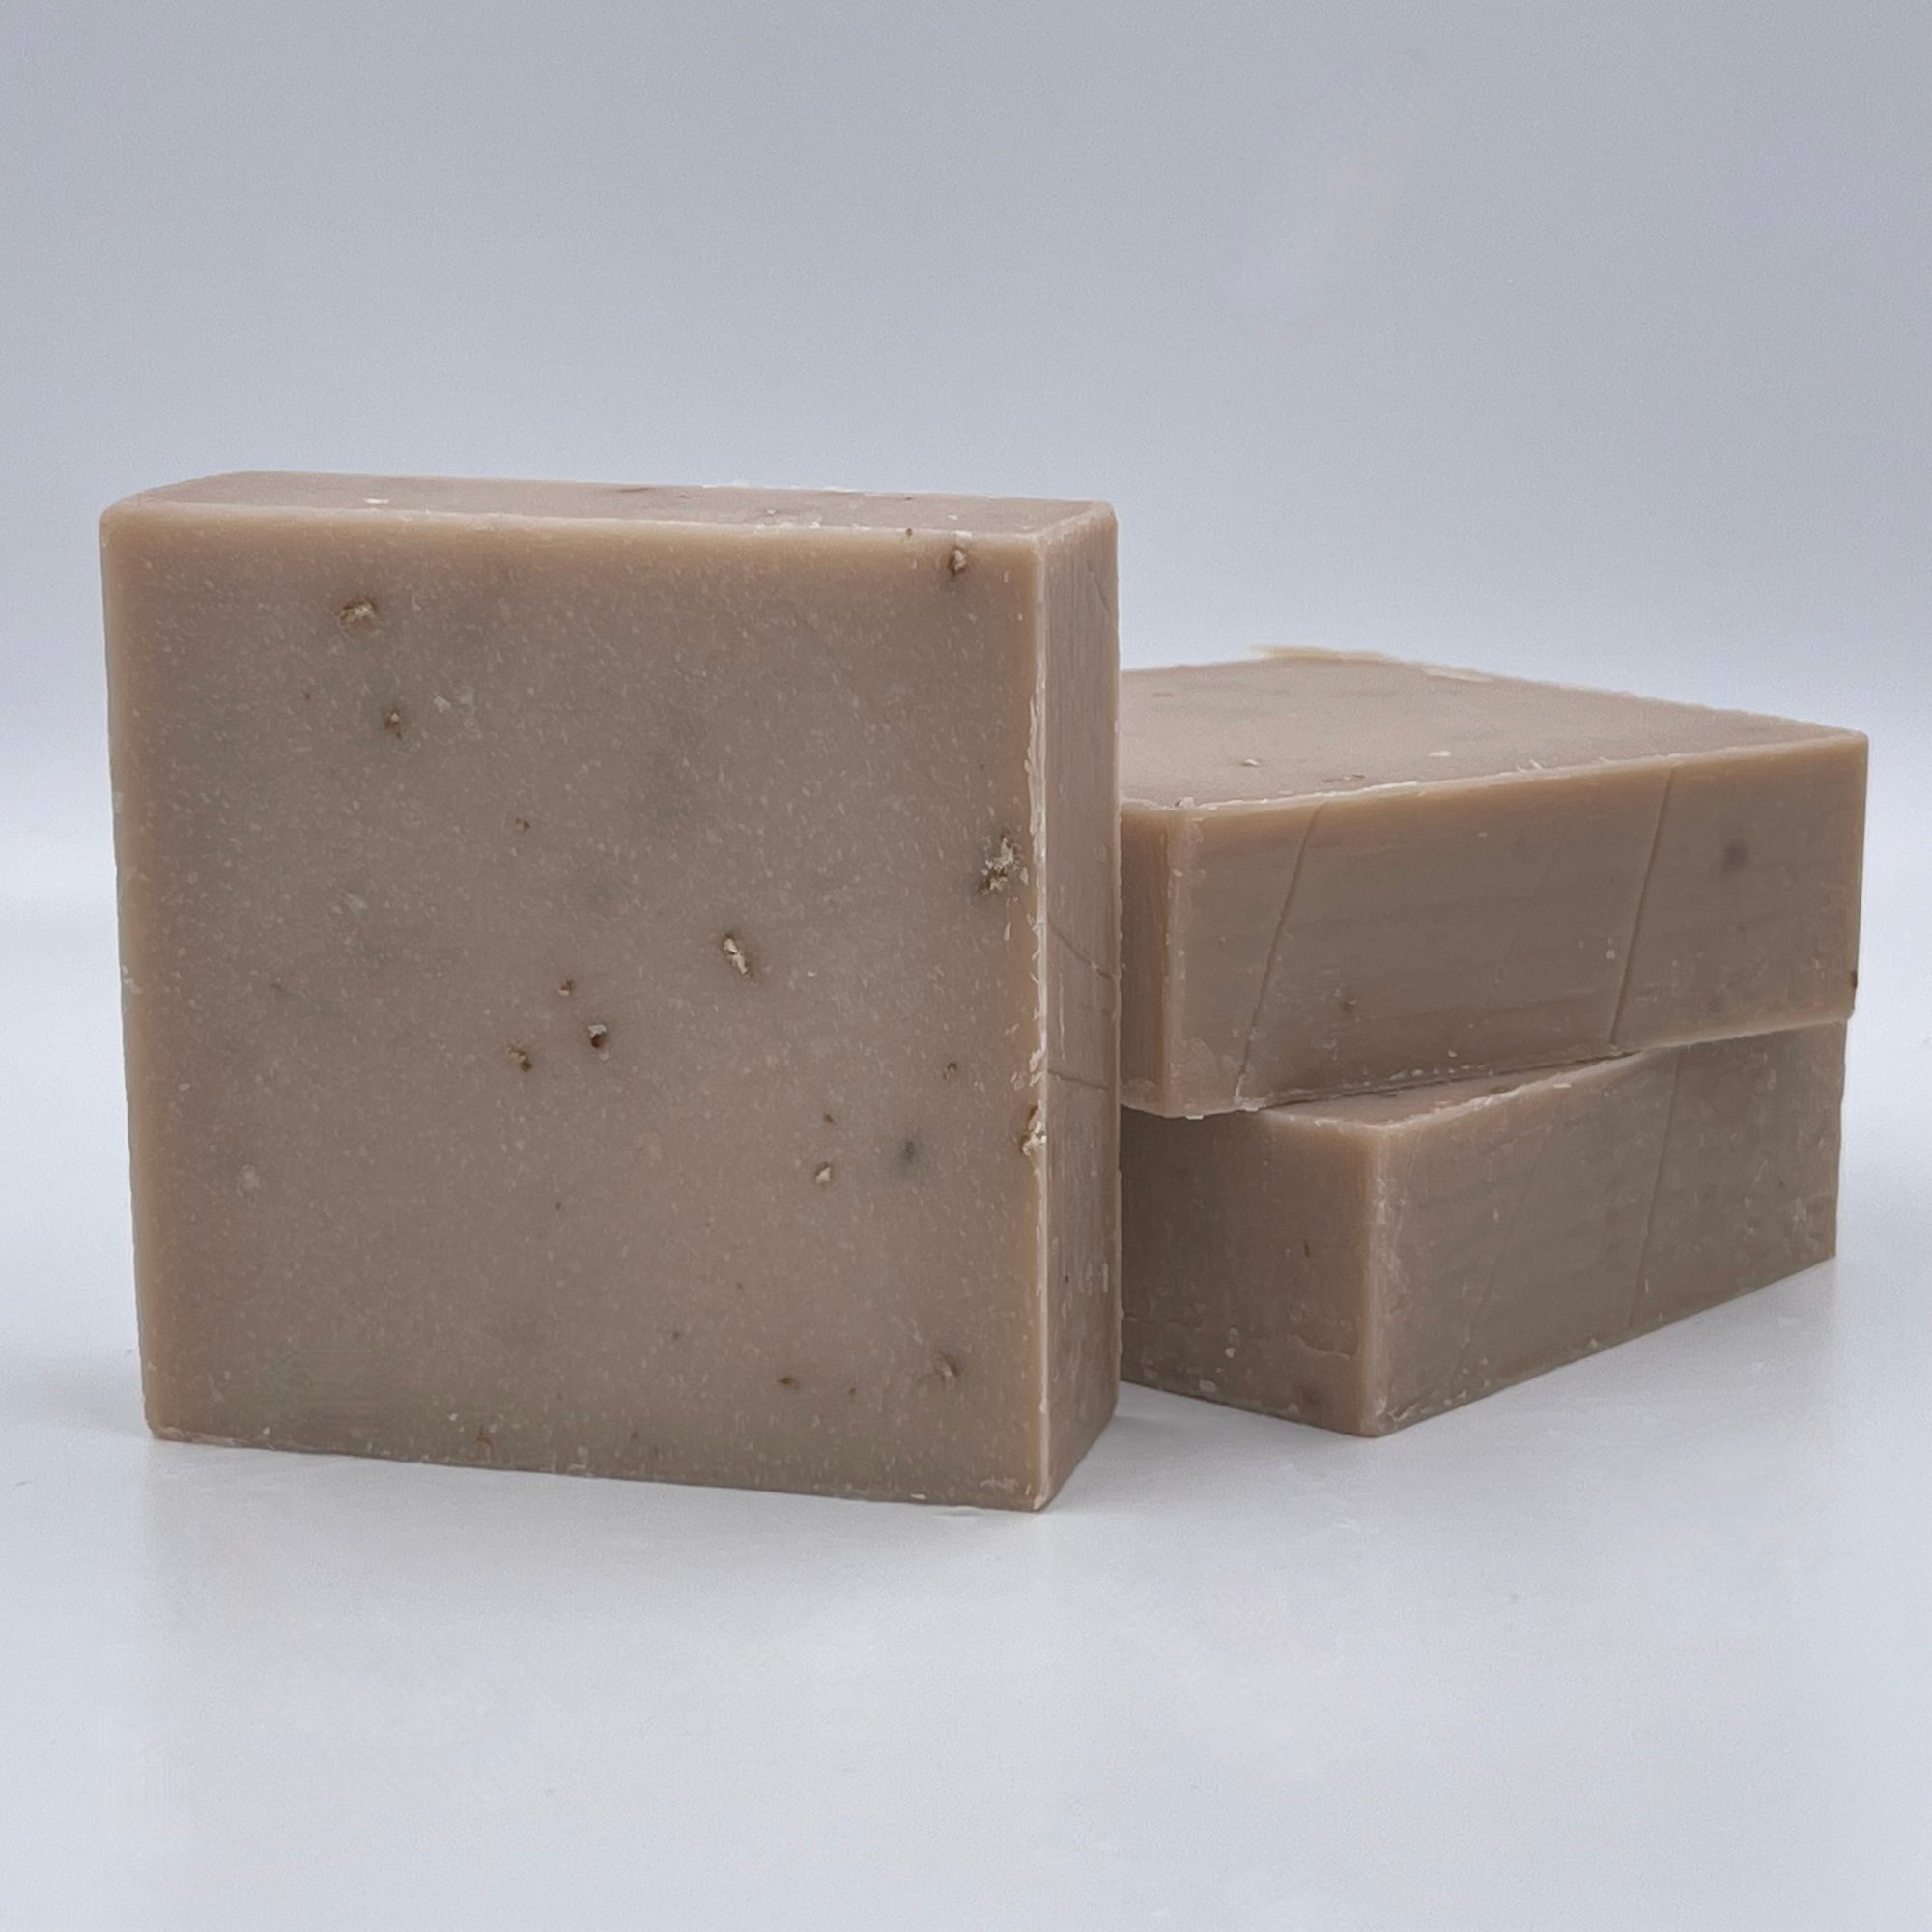 Top Five Reasons to Buy Handcrafted Soap | Artisan Soaps